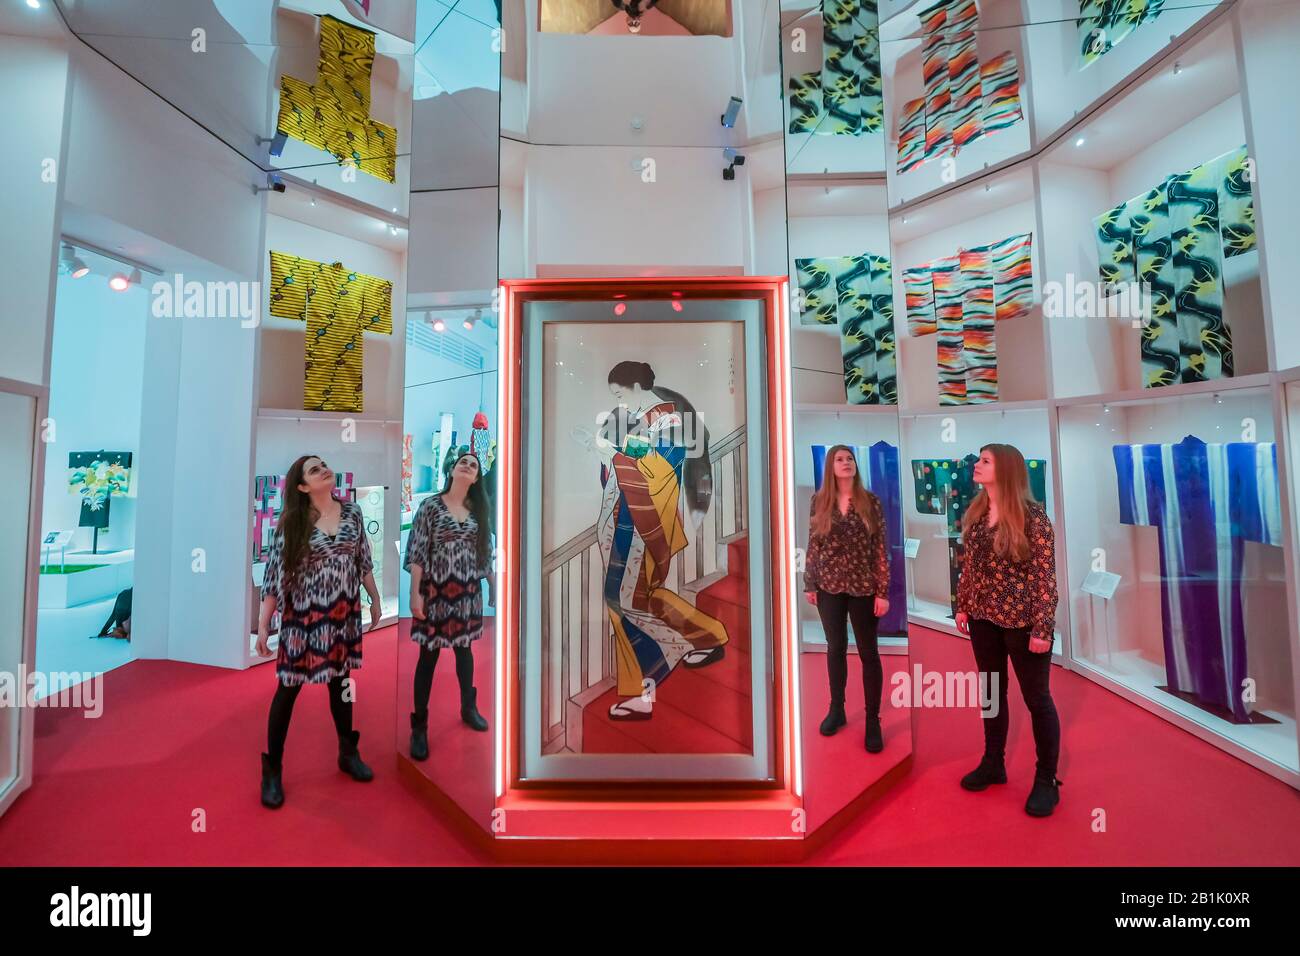 London, UK. 26th Feb, 2020. Kimono: Kyoto to Catwalk - a new exhibition at the V&A explores a symbol of Japan. The kimono is often perceived traditional, timeless and unchanging but